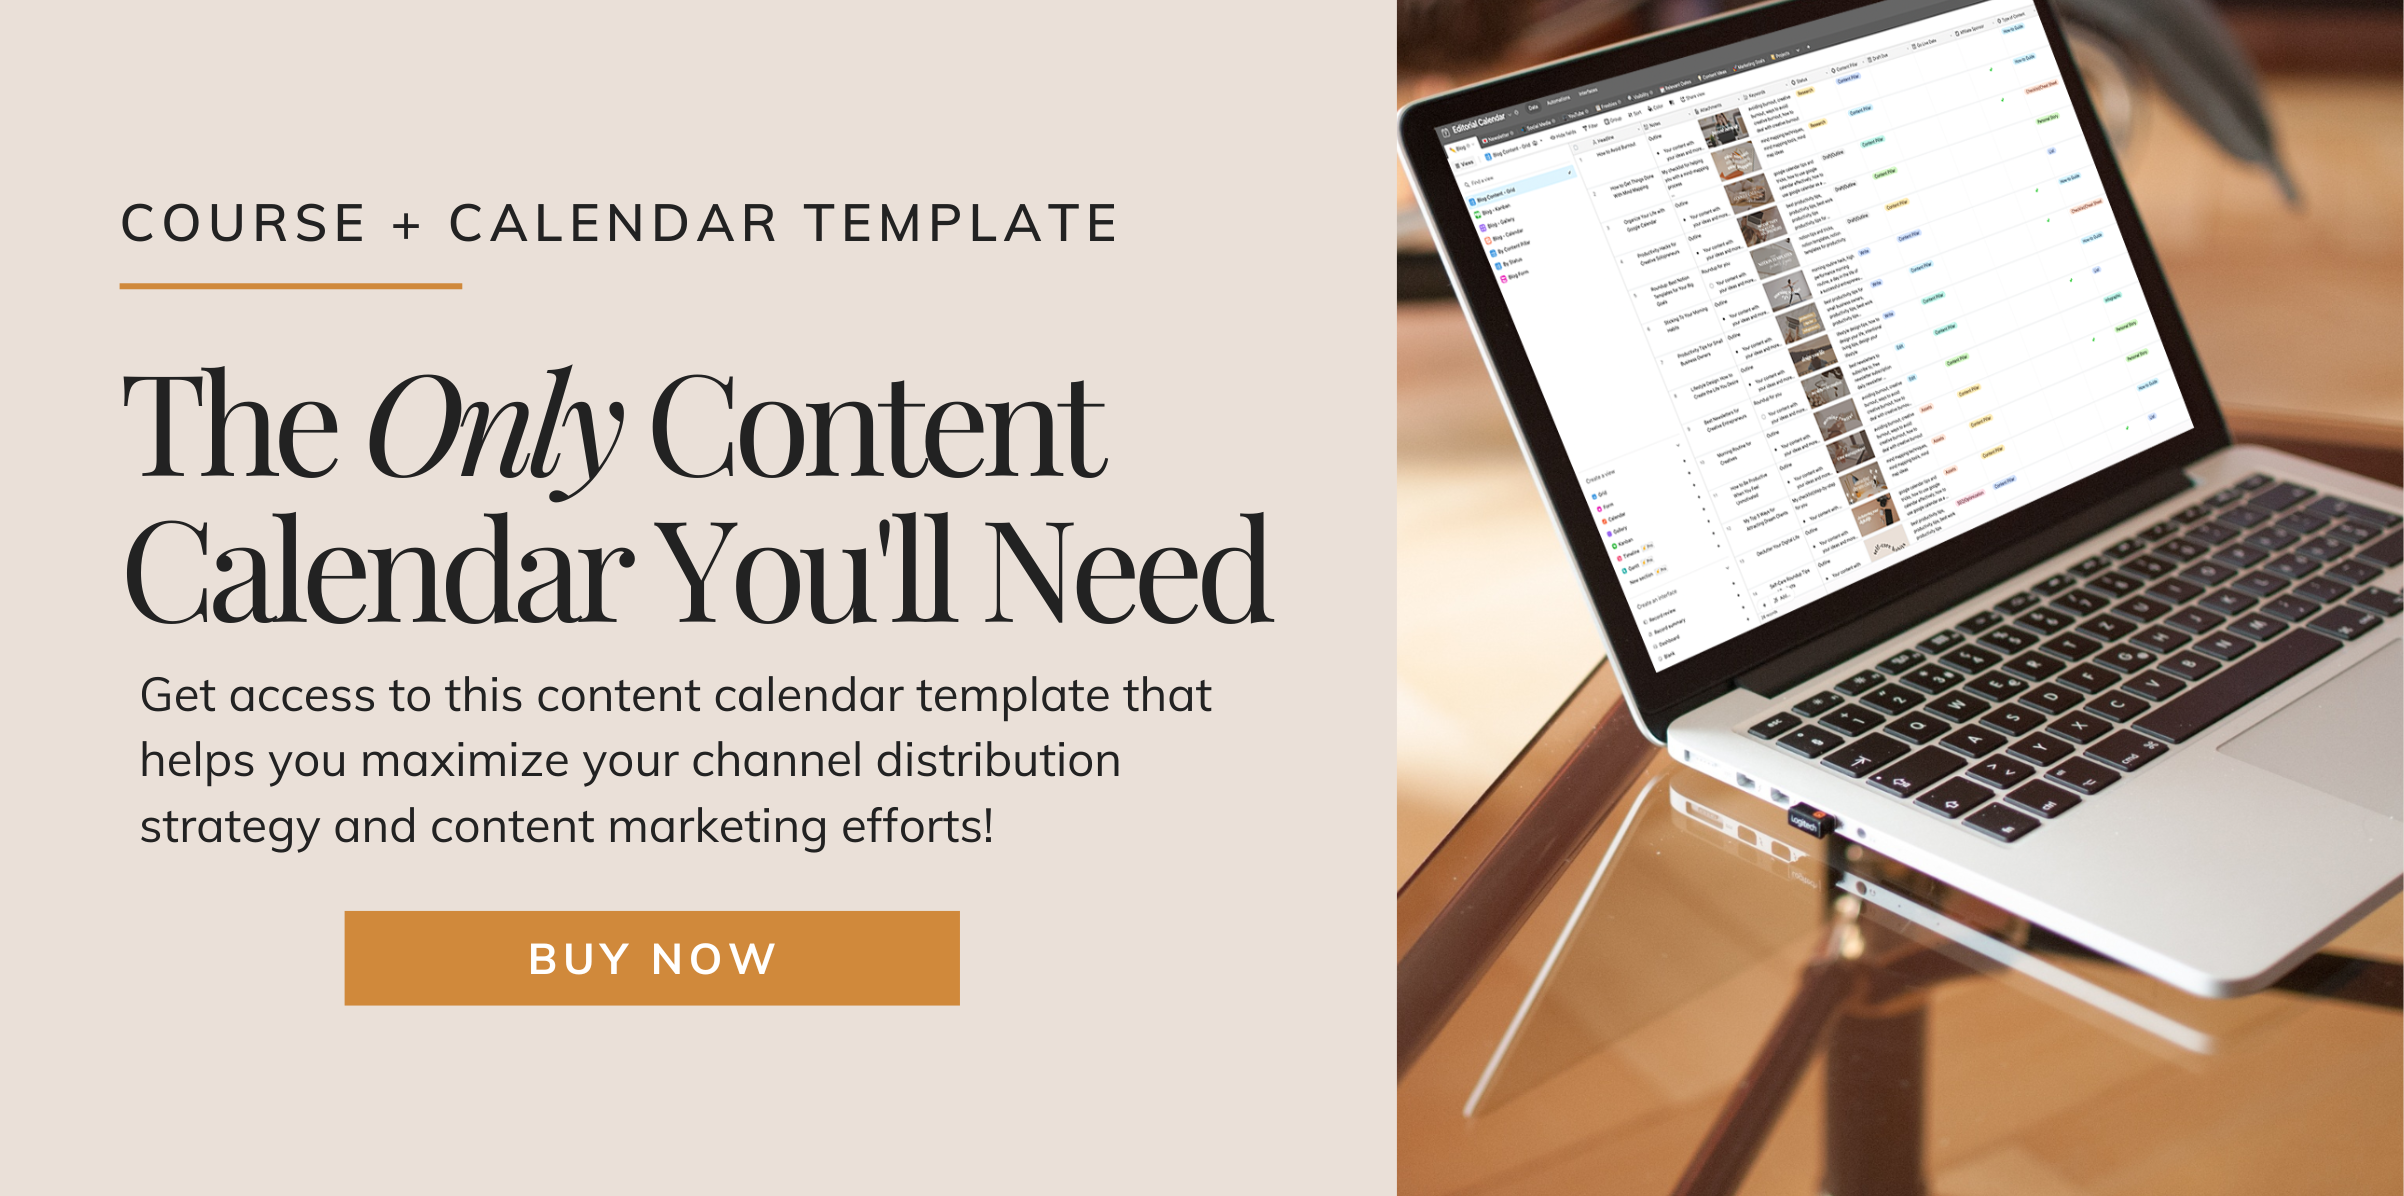 This calendar has the foundational elements built into it that will help you be more strategic with the content and marketing activities you’re focusing on.